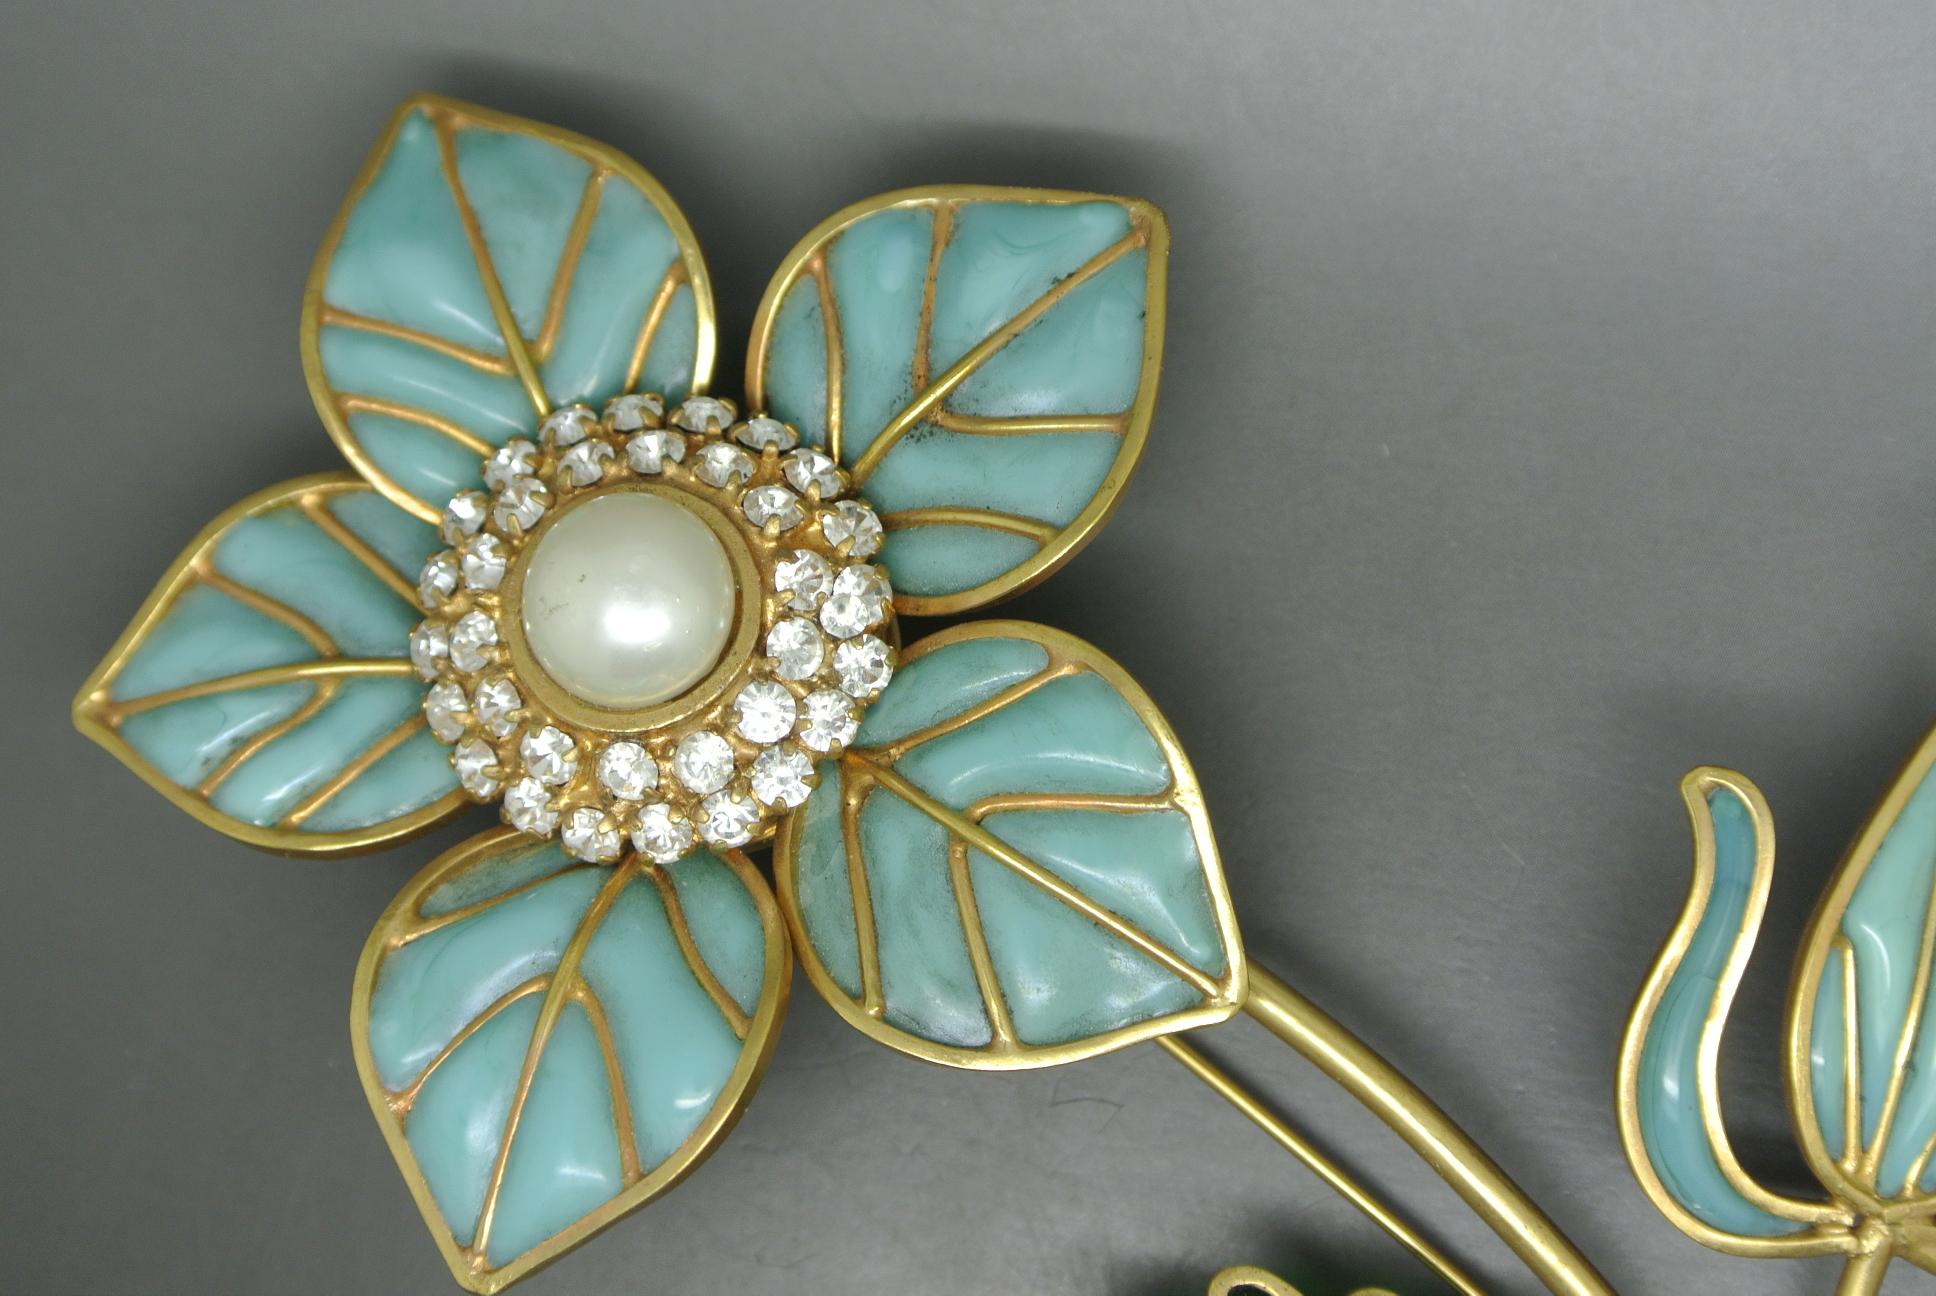 Cristobal signed brooch
Made by Gripoix workshop in paris
Very large one
Dated 1990s